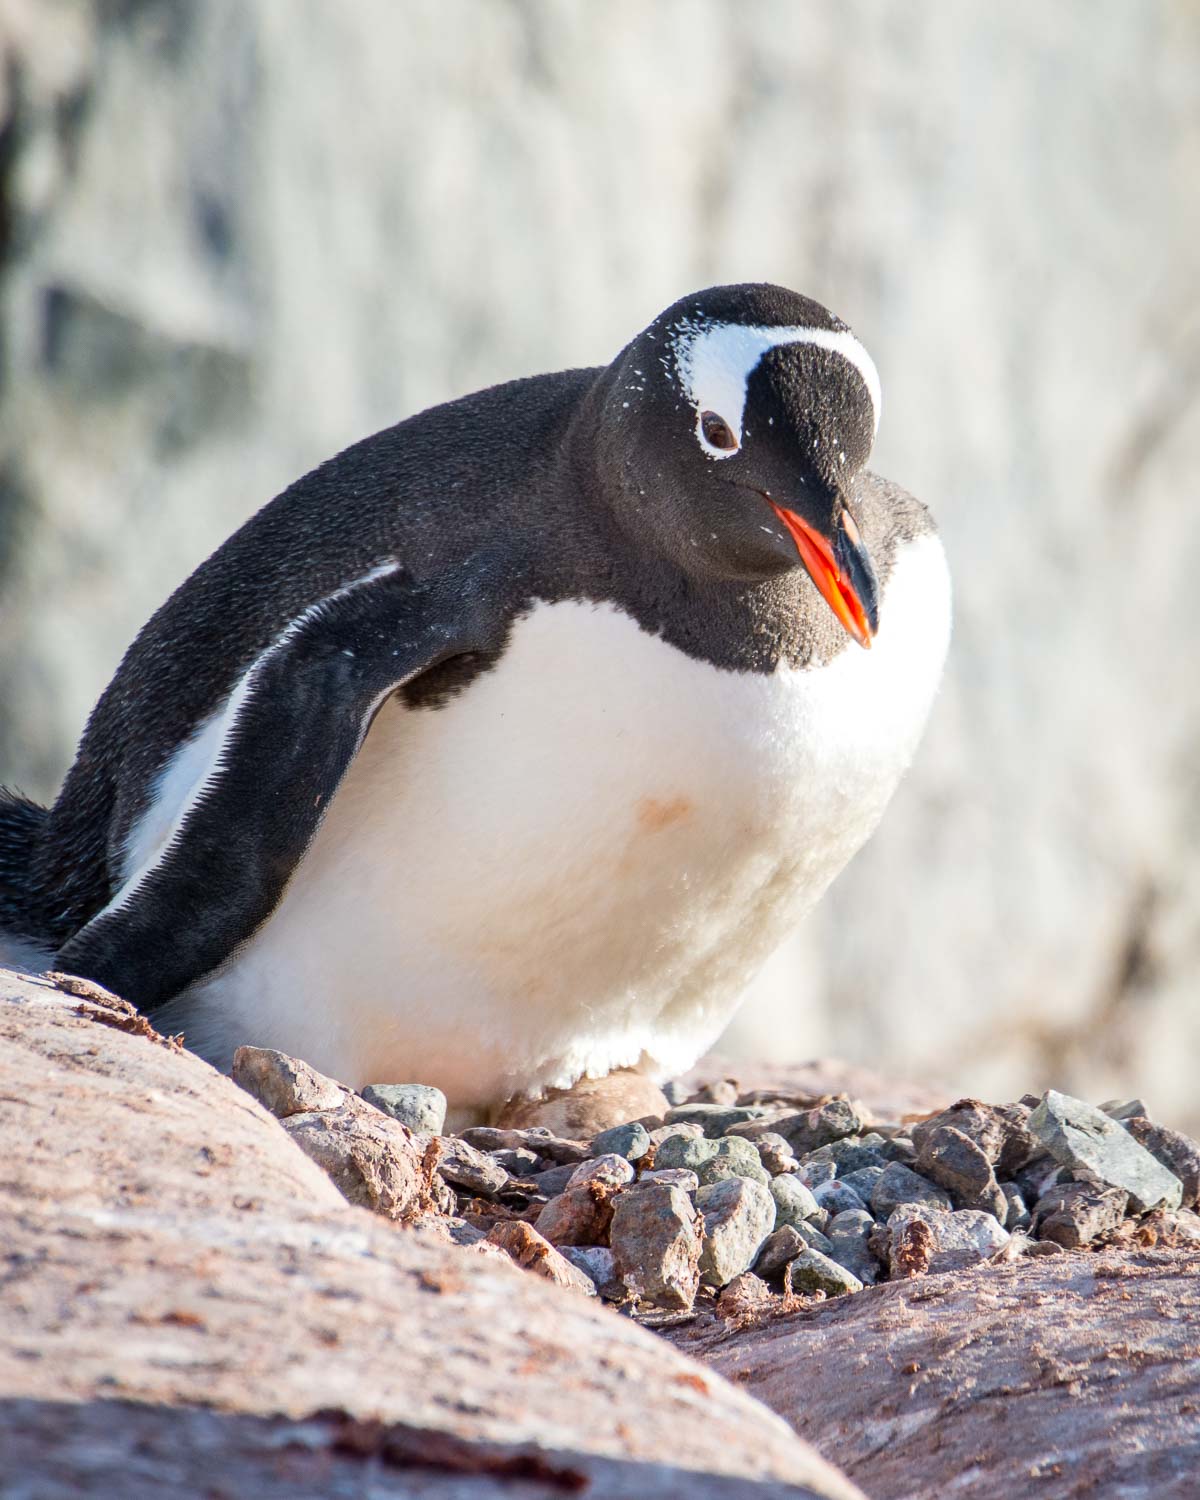 A gentoo penguin itting on an egg on its nest. 